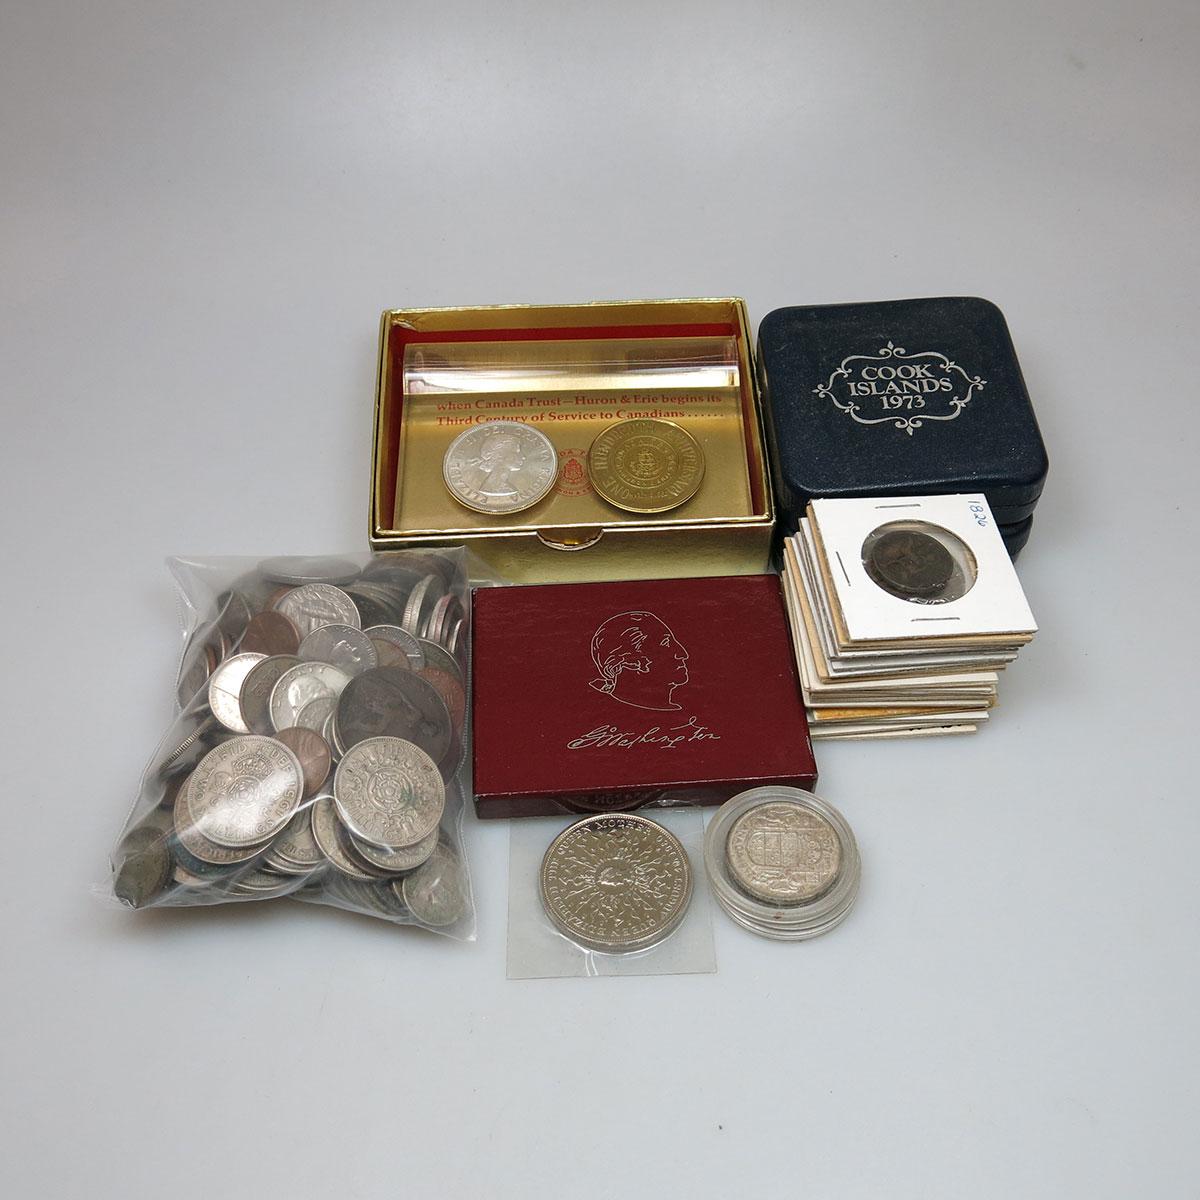 Small Quantity Of Foreign Coins, Canadian Mint Product, Etc